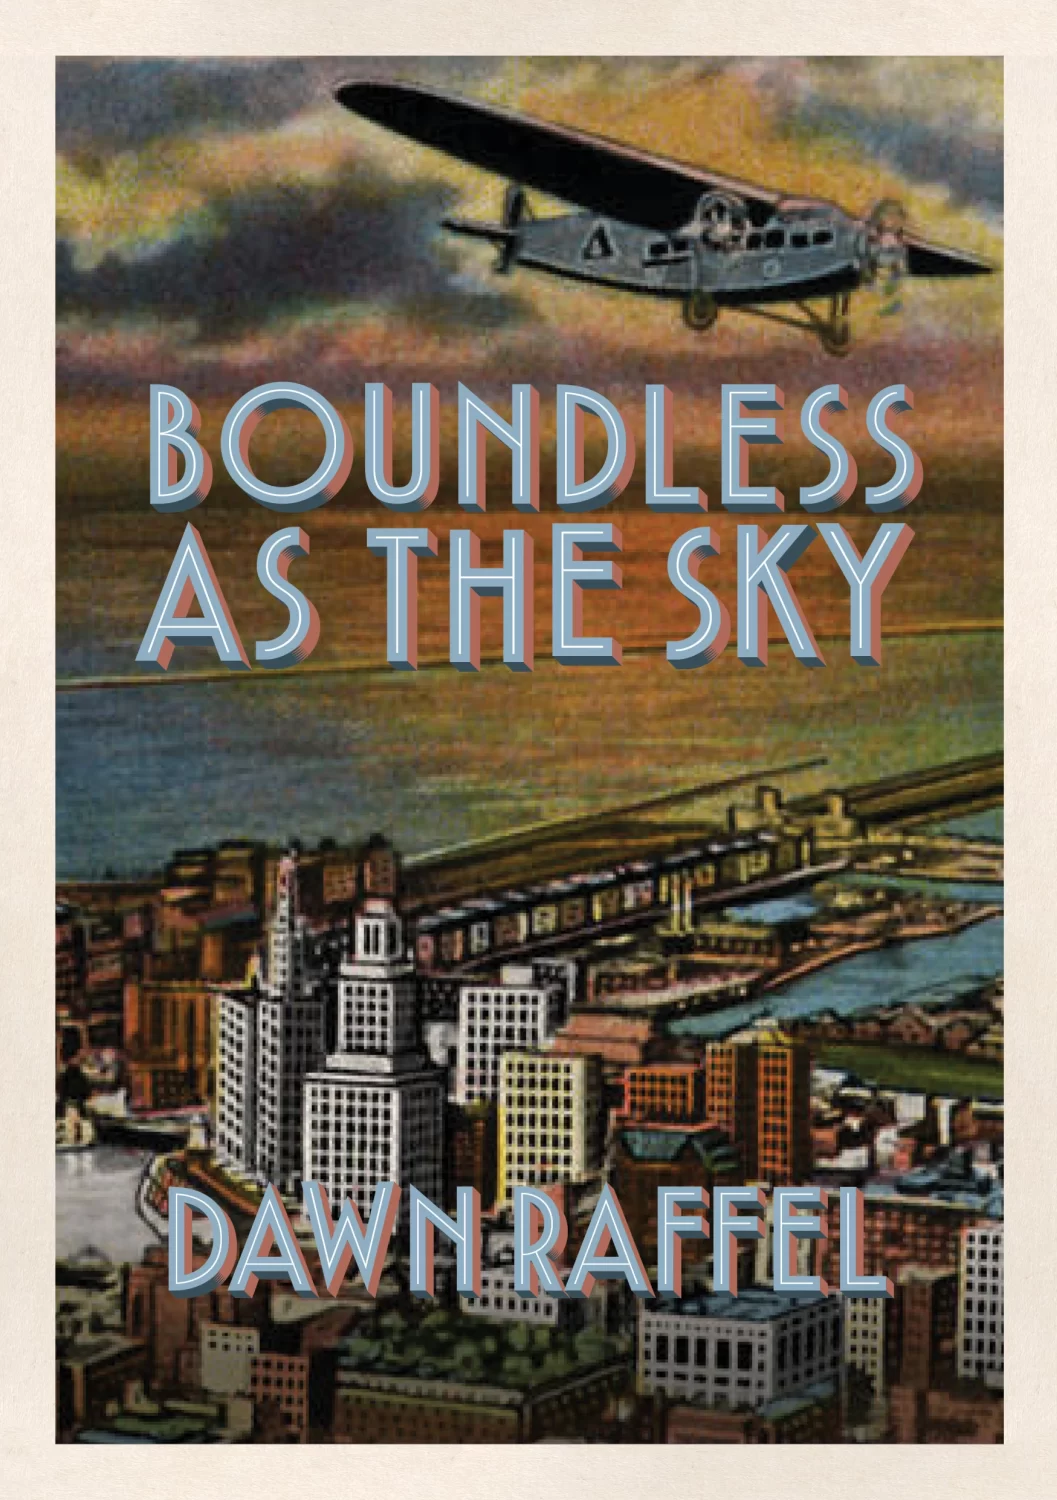 "Boundless As The Sky" cover, featuring a 1930s plane flying over a model city.